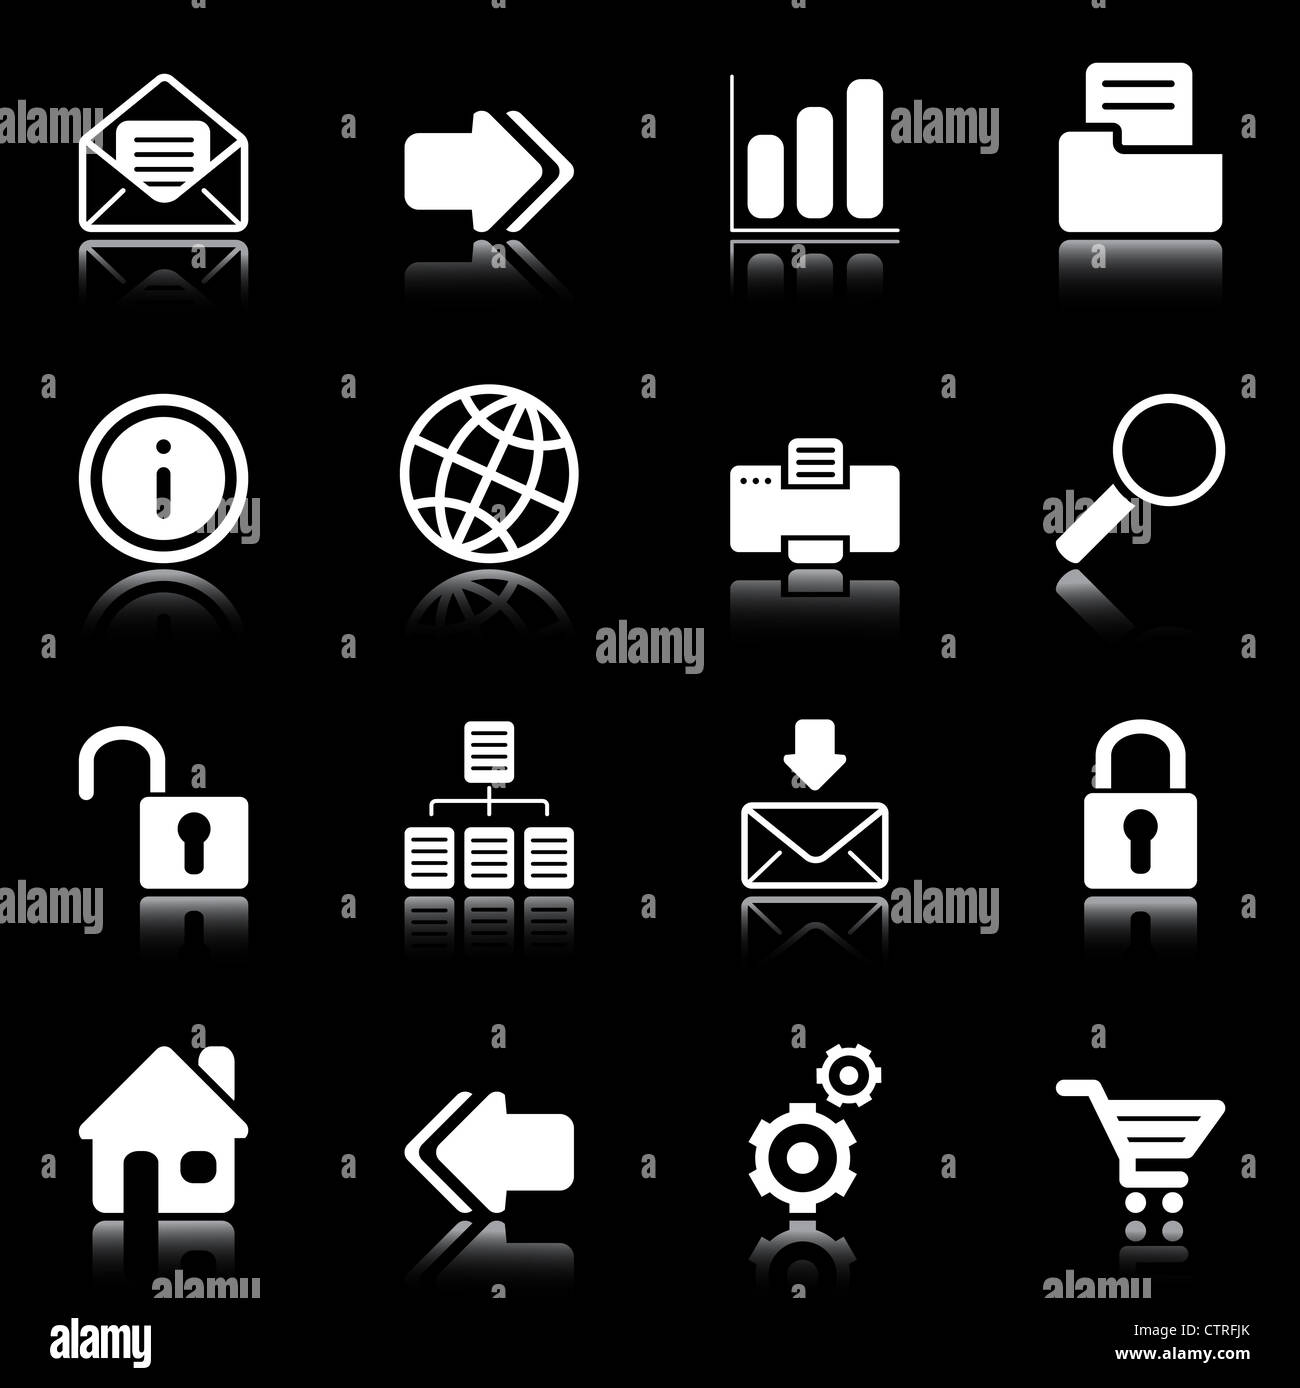 Web and Internet icons reflected on black background, isolated objects Stock Photo